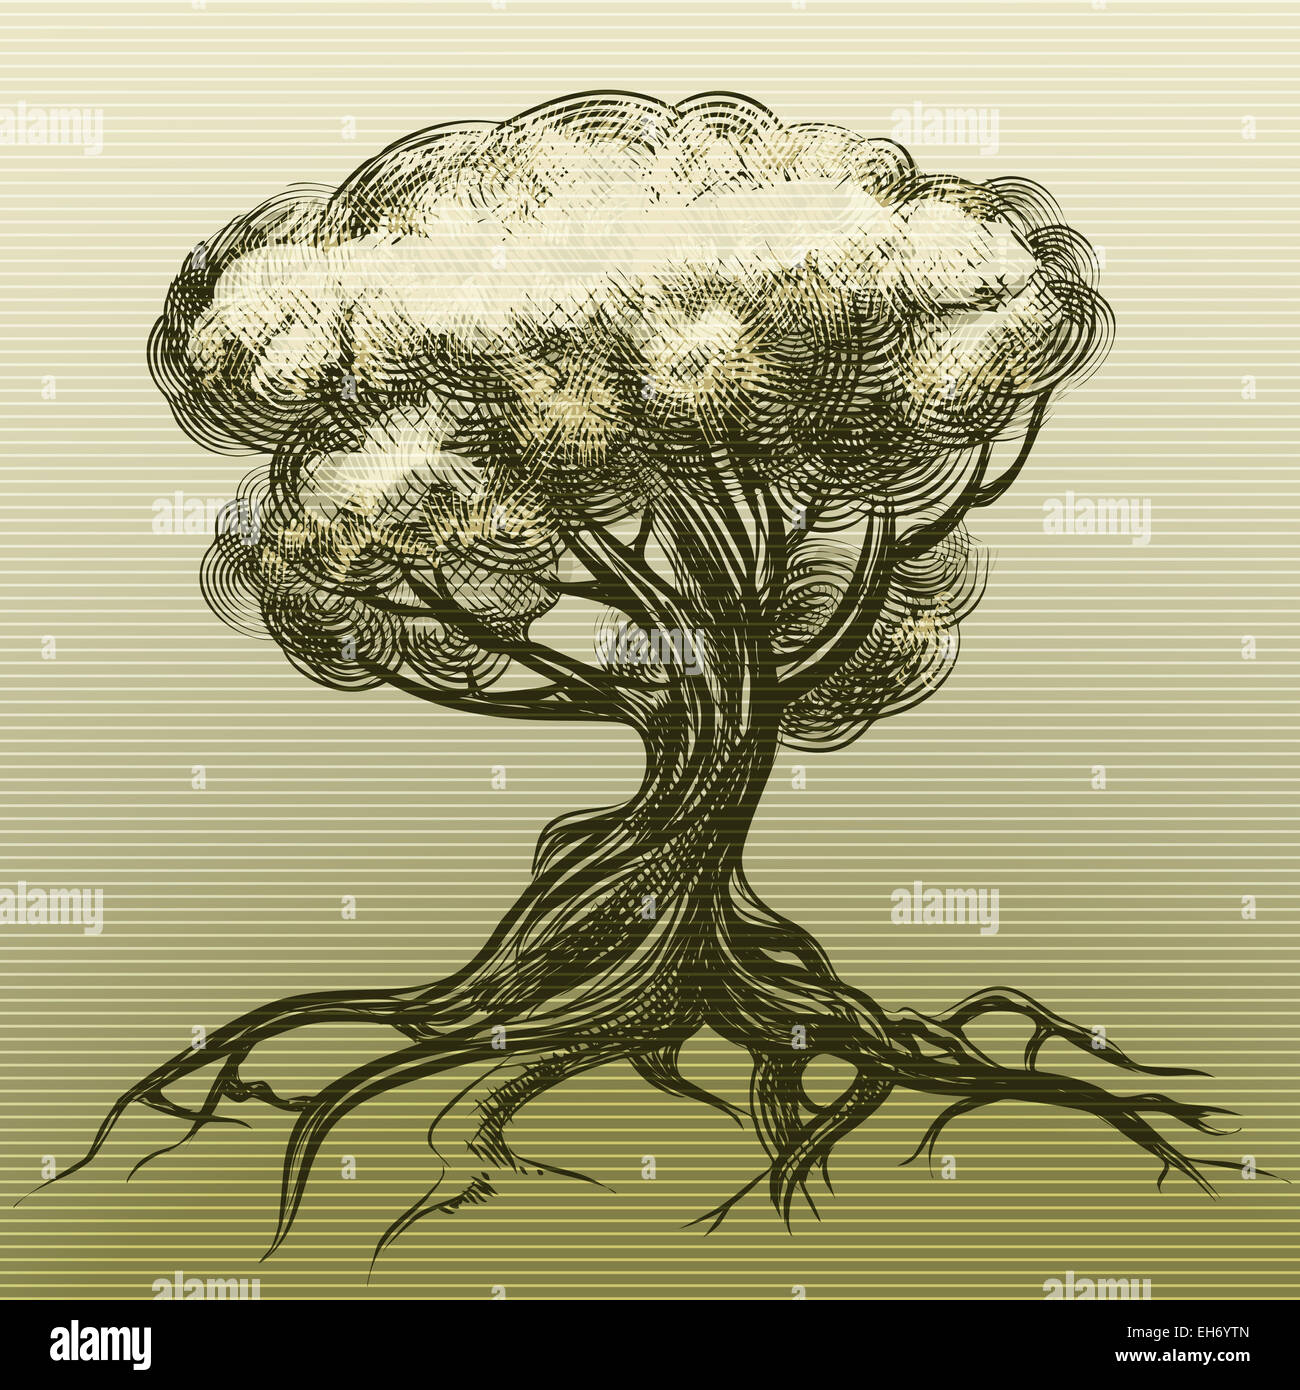 Illustration of tree as allegory of nature drawn in vintage ink style Stock Photo